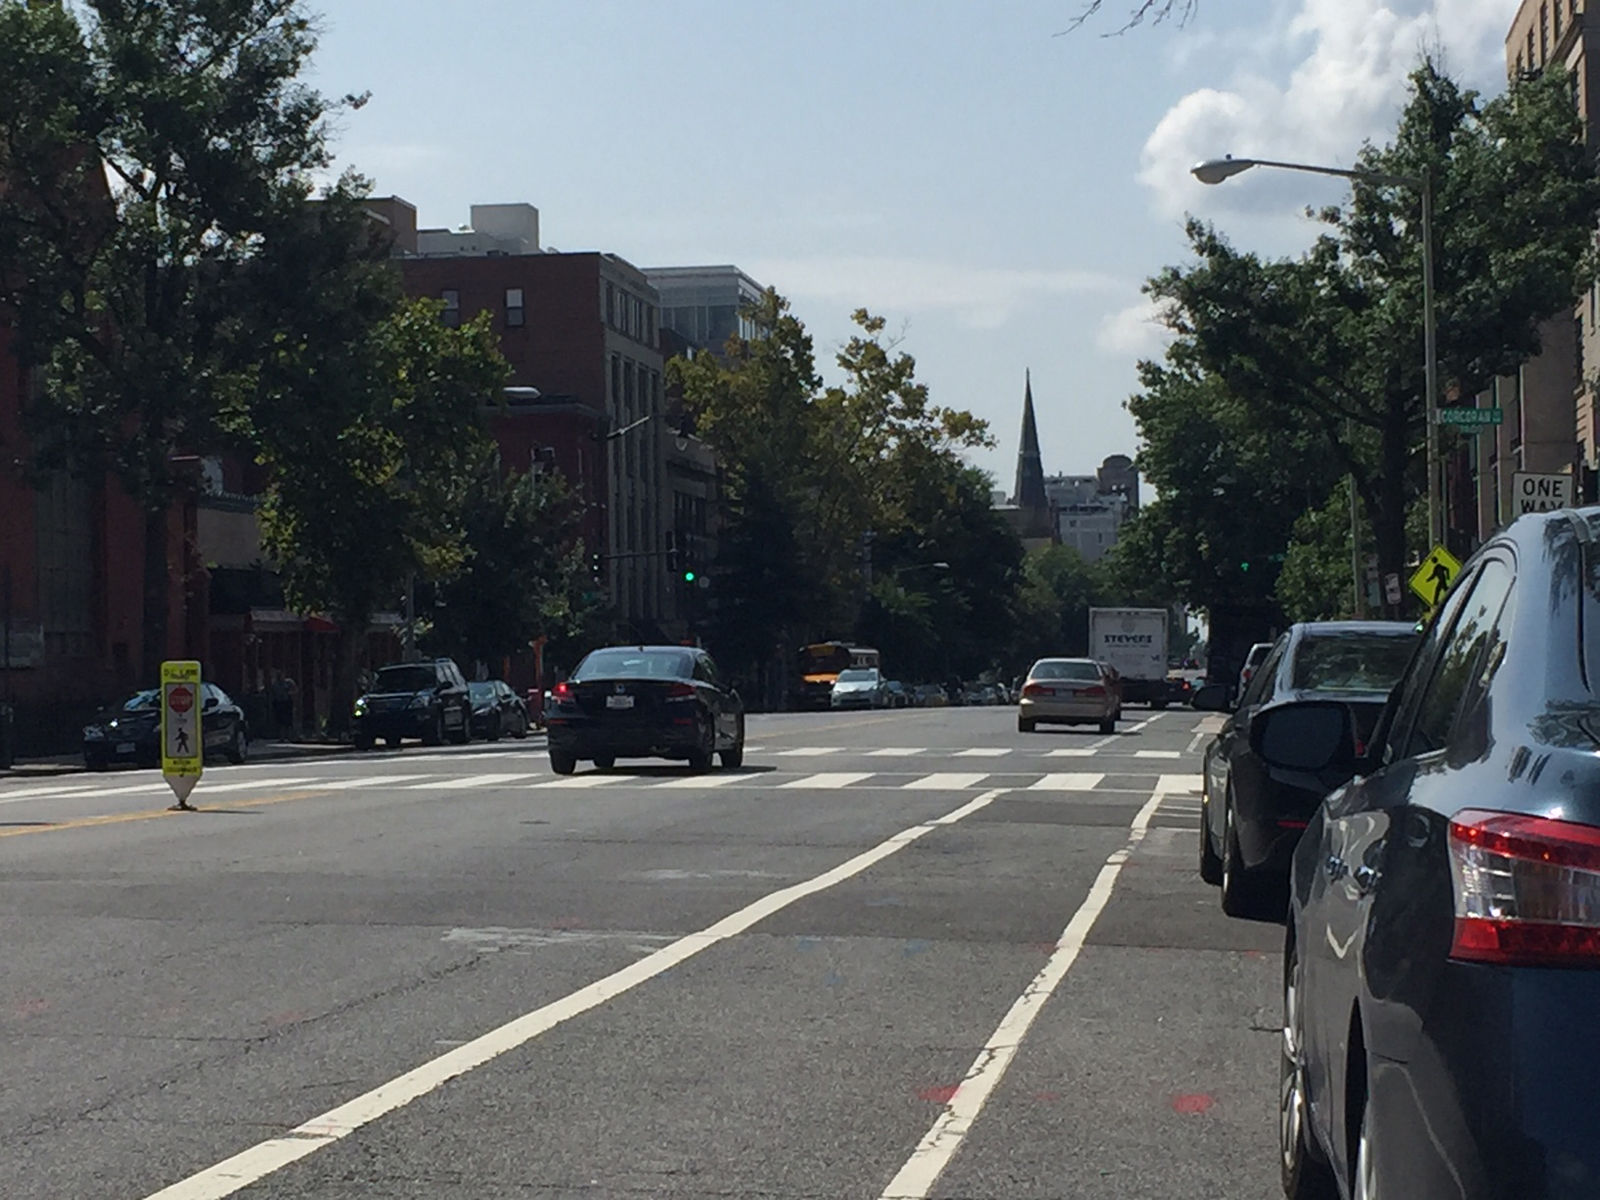 The intersection of the 1400 block of Corcoran Street NW in D.C. An armed robbery happened near here in broad daylight last week, despite that residents say they feel safe in the neighborhood. (WTOP/Dennis Foley)